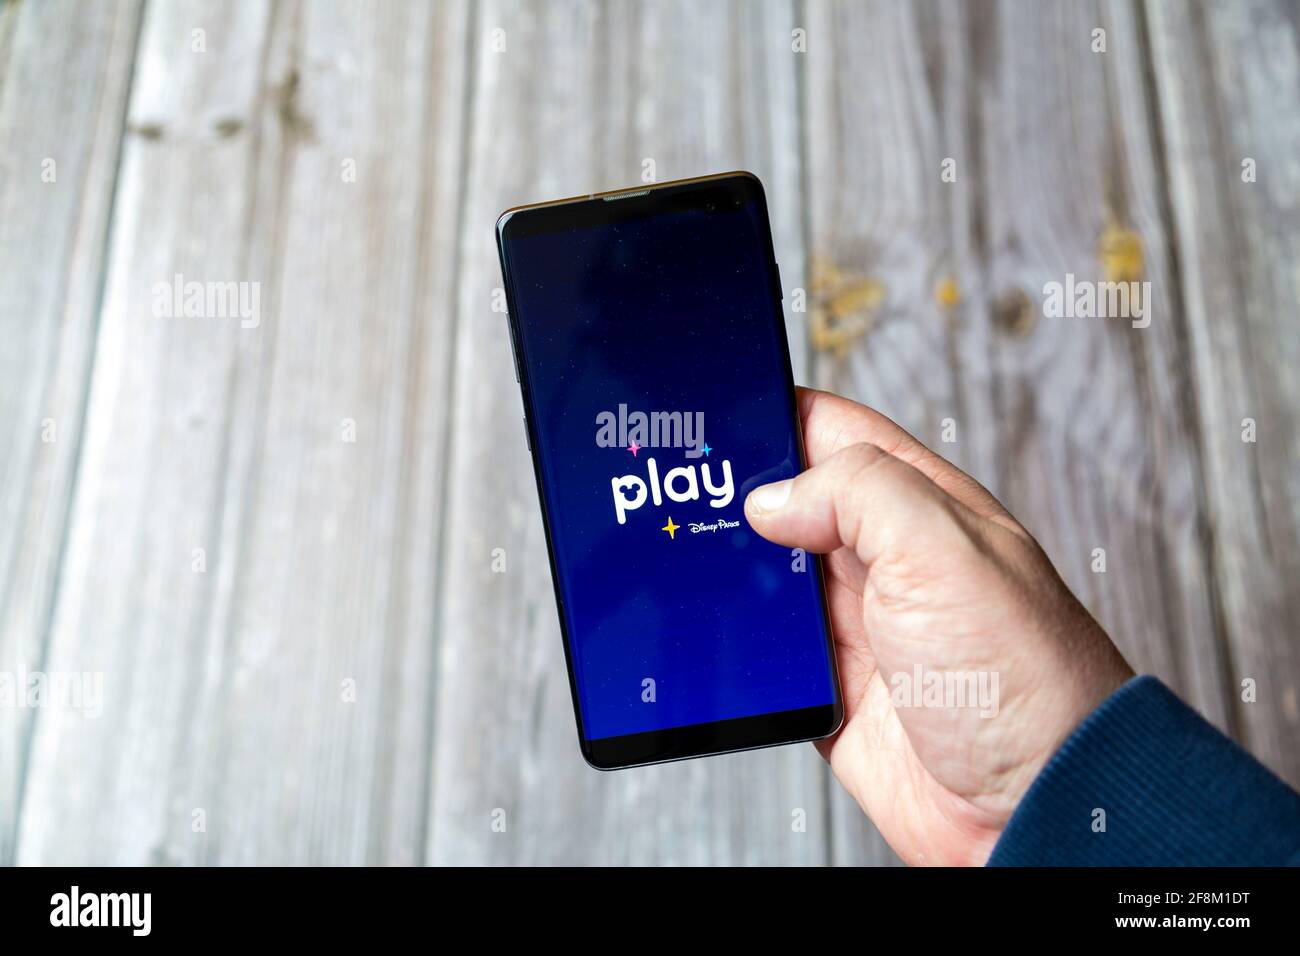 A Mobile phone or Cell phone being held in a hand showing the Play disney parks app on screen Stock Photo